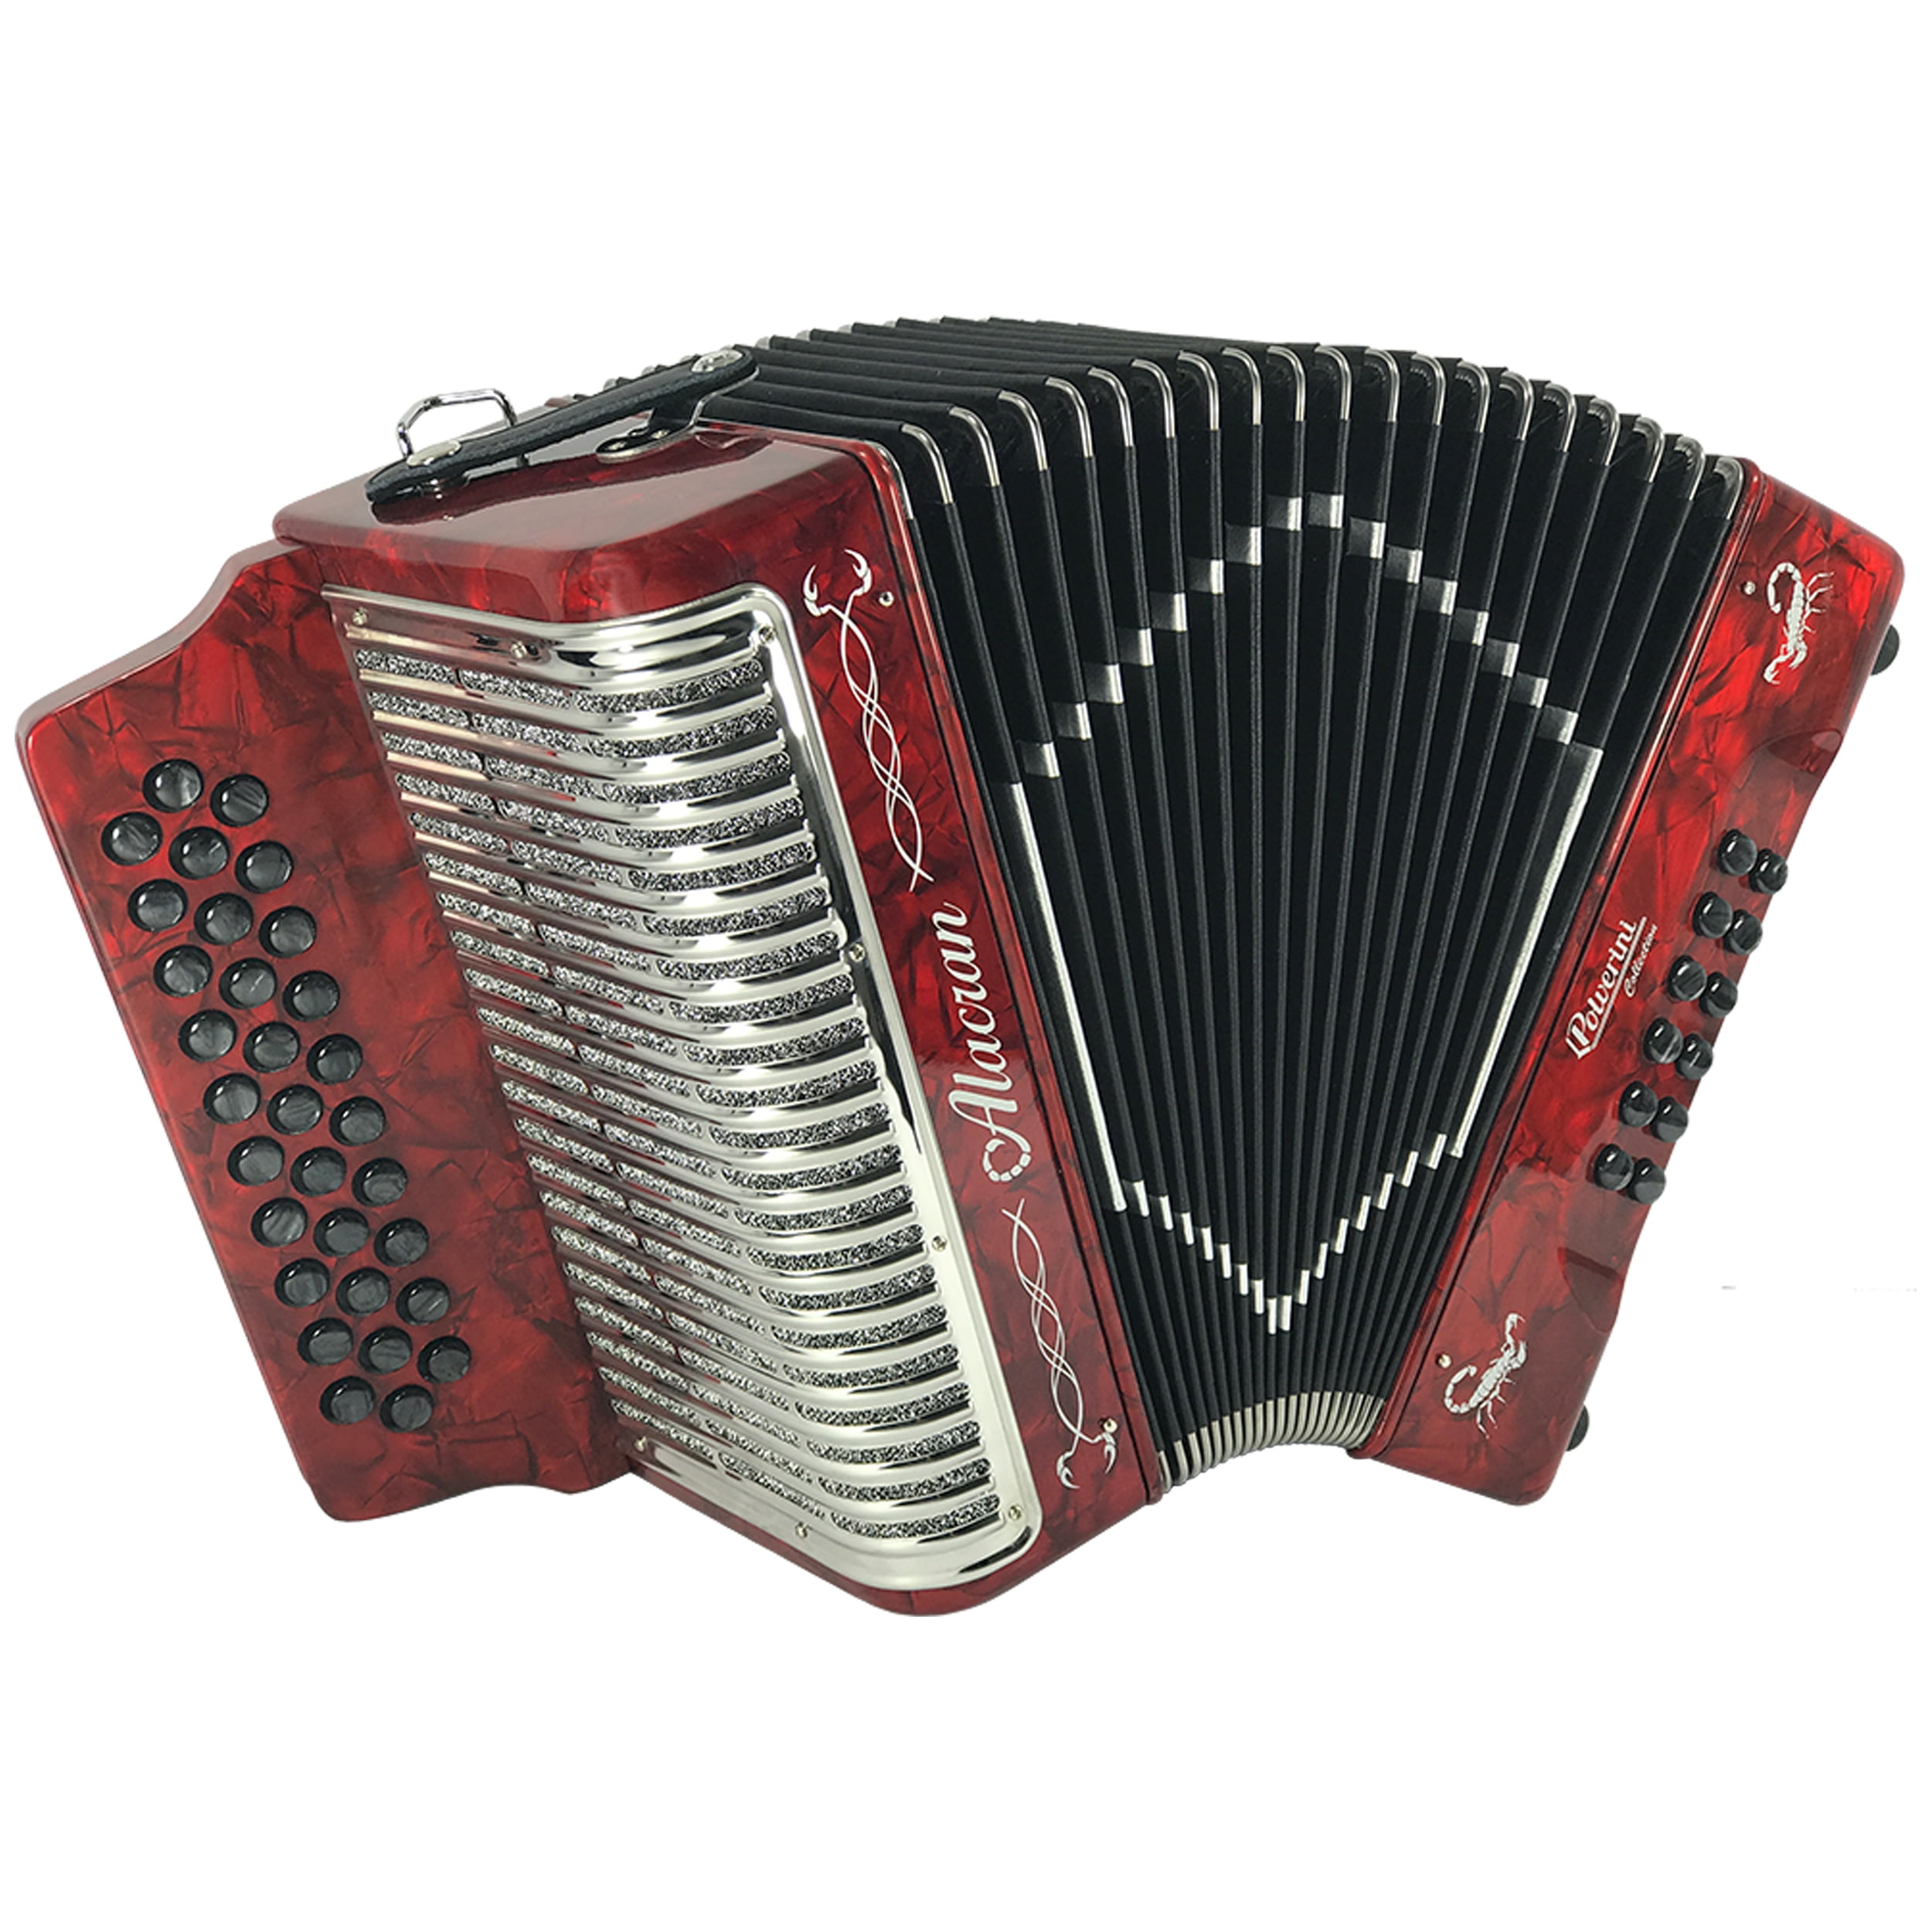 Are Accordions Still Made?